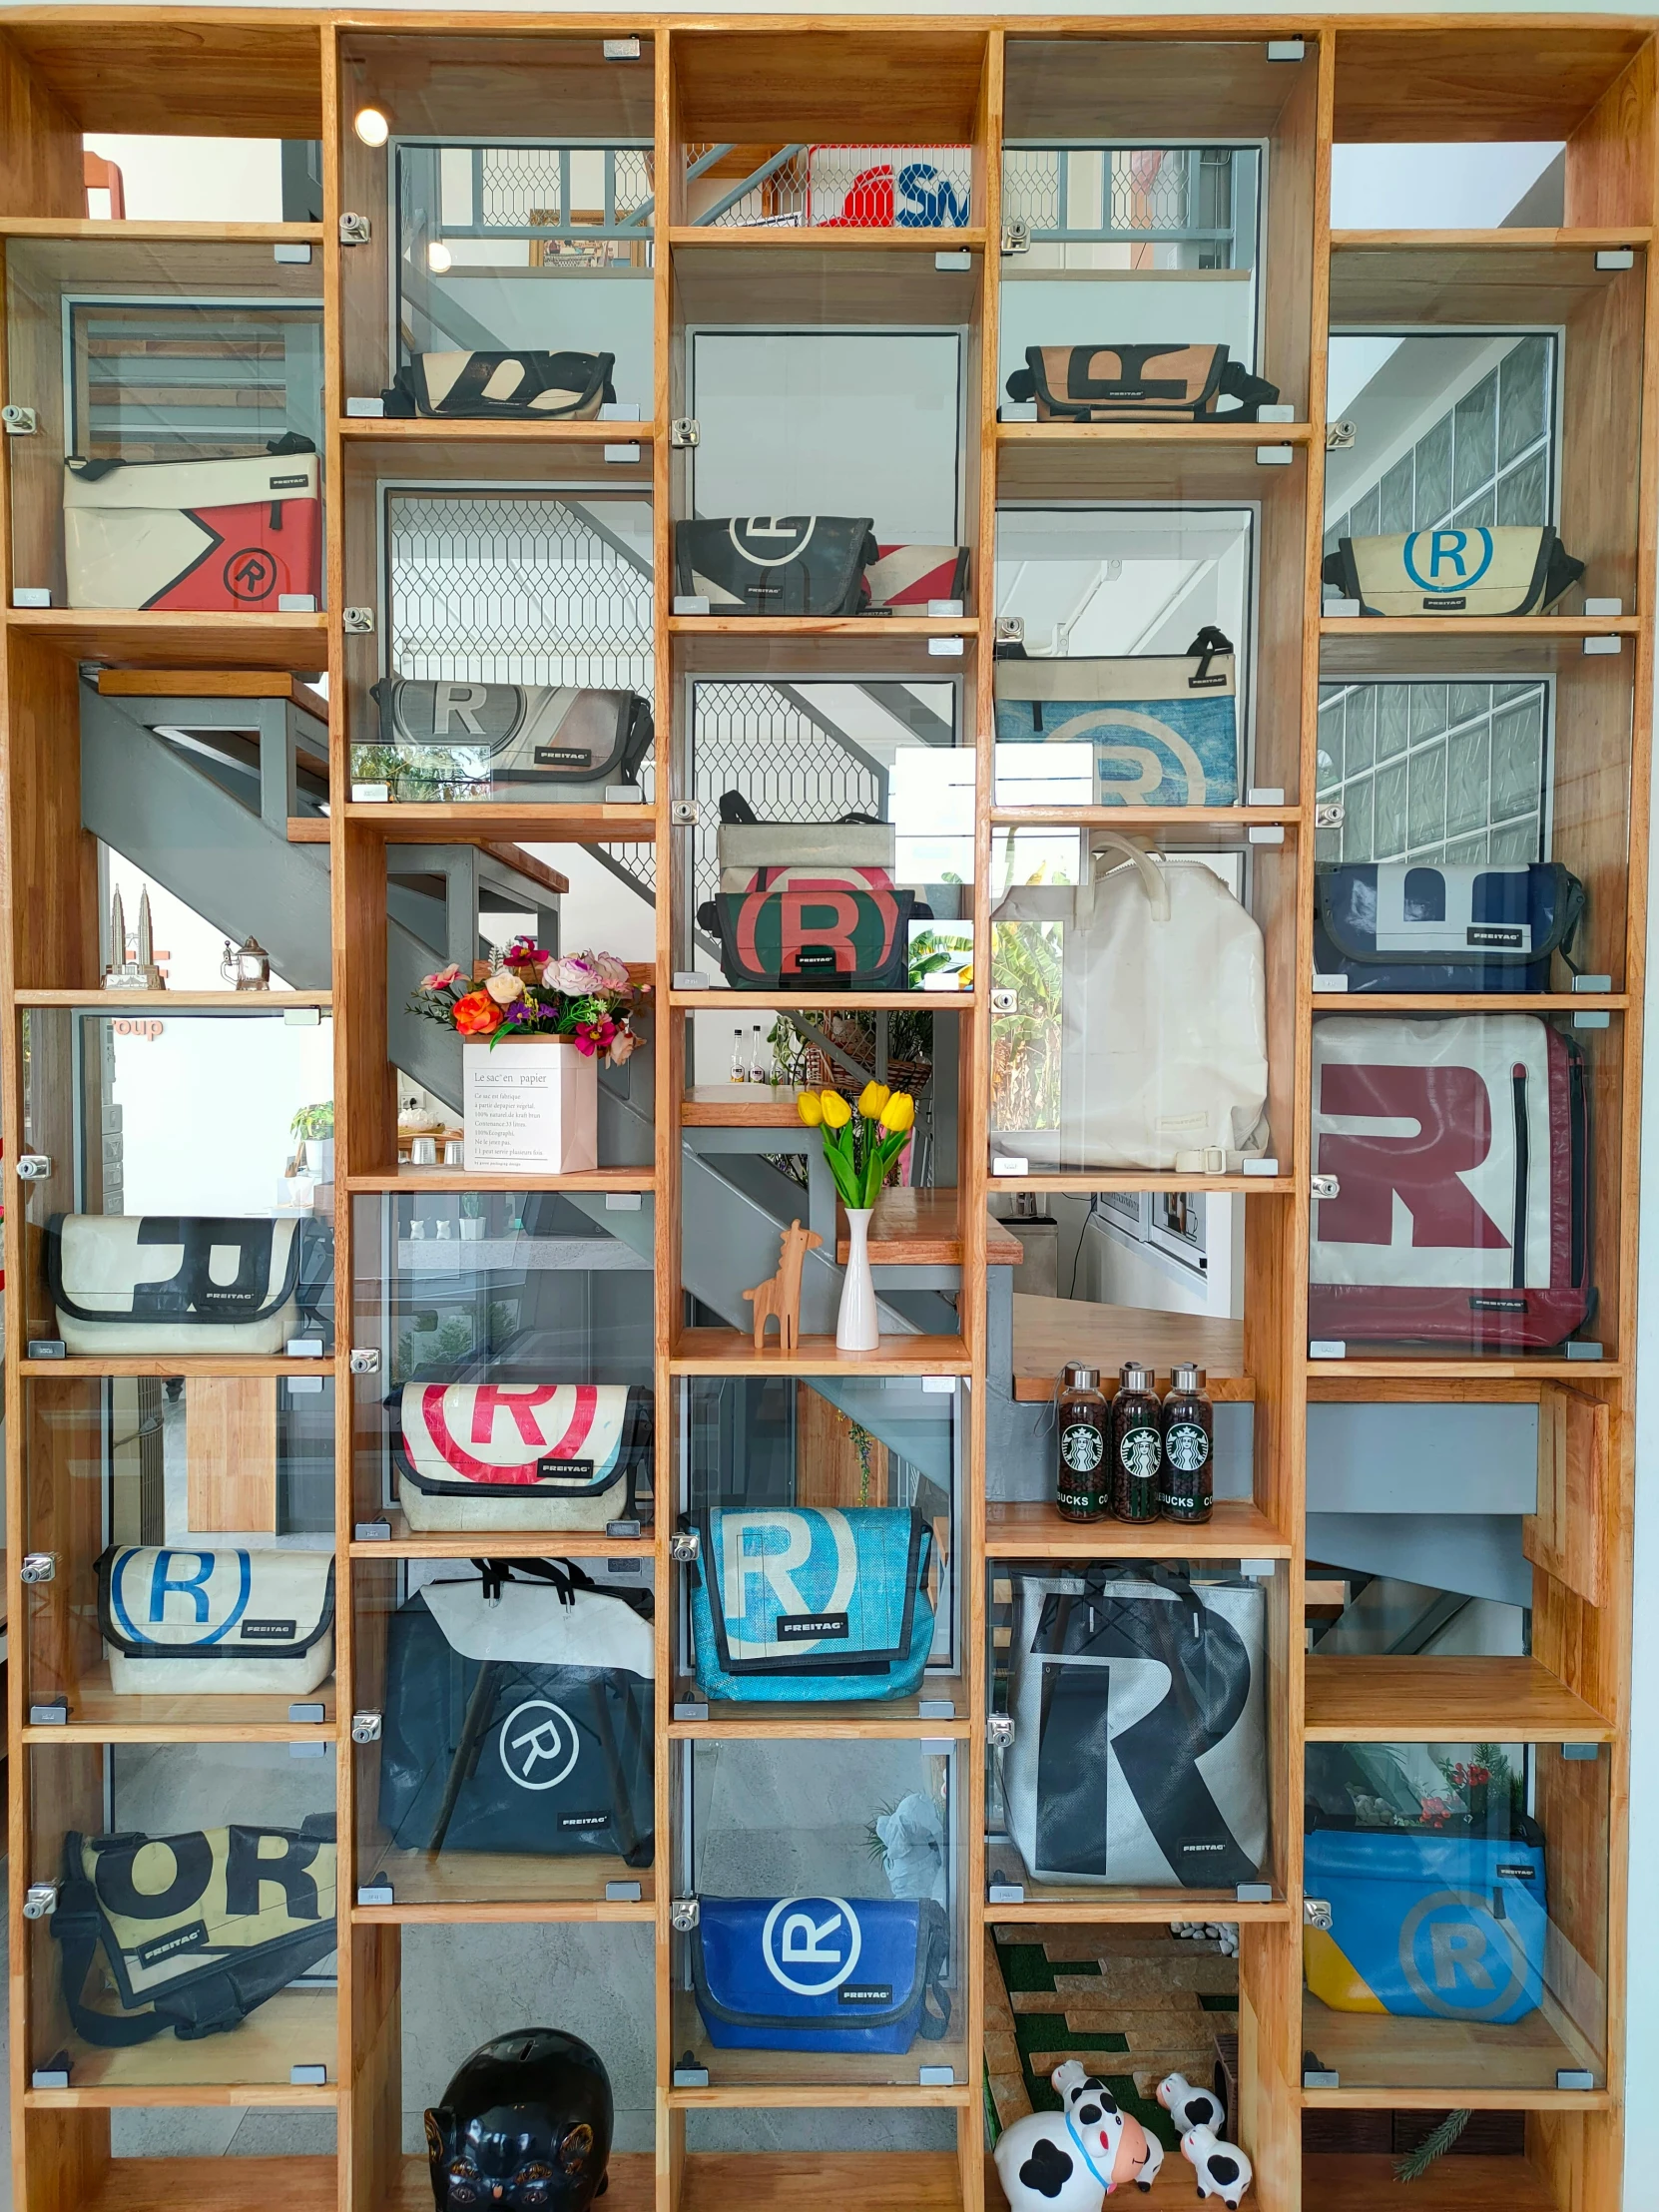 a display case filled with lots of different items, inspired by Conrad Marca-Relli, letterism, bags, restomod, 64x64, recycled